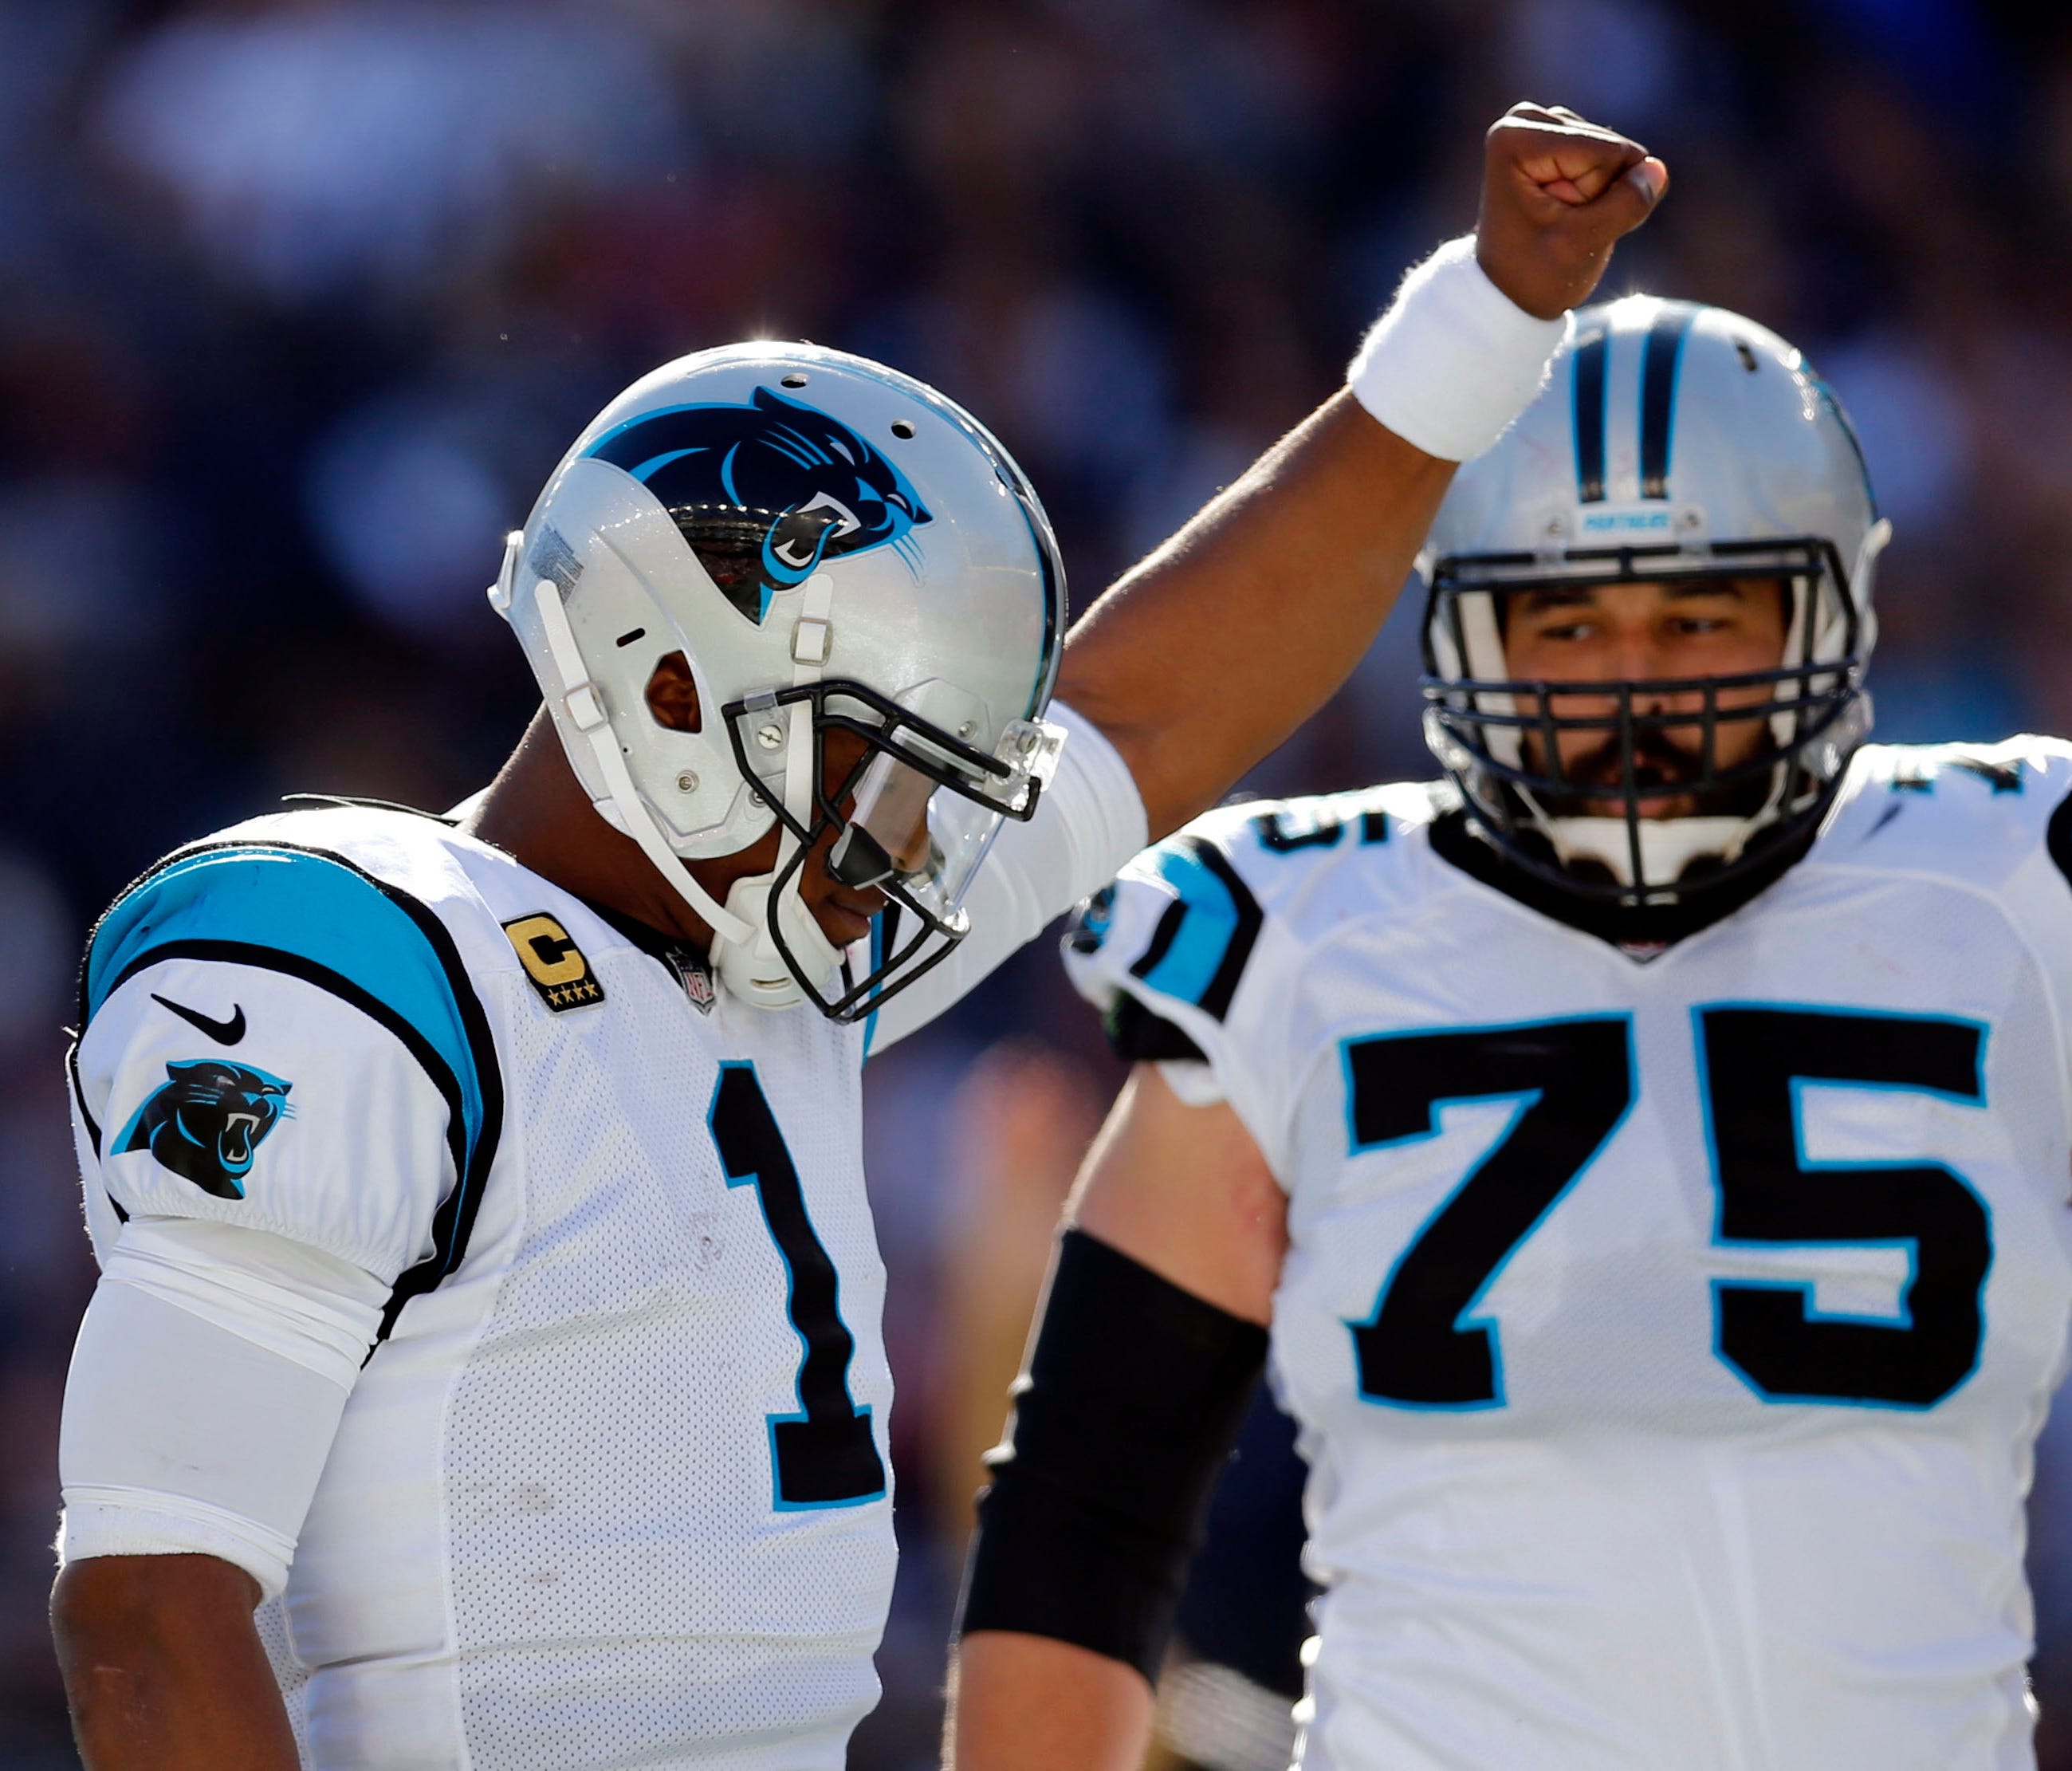 Cam Newton celebrates a touchdown during the second half against the New England Patriots.